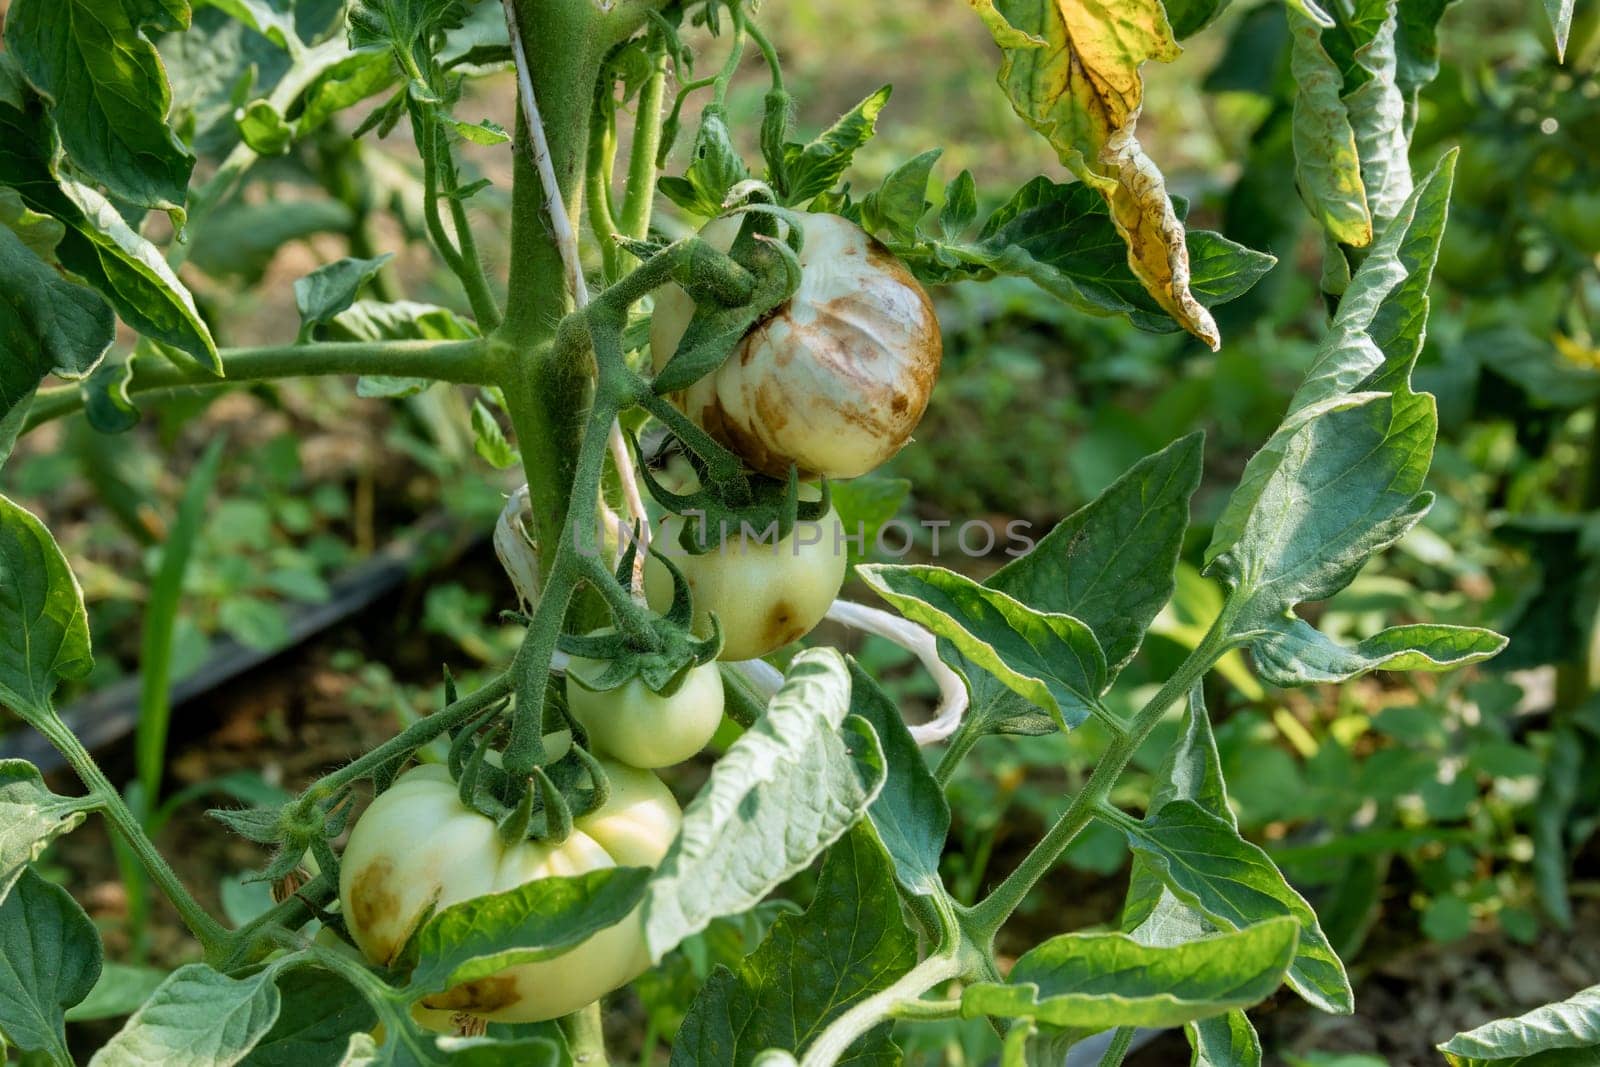 Sick tomato plants can be treated through proper disease interventions and the use of appropriate fungicides.